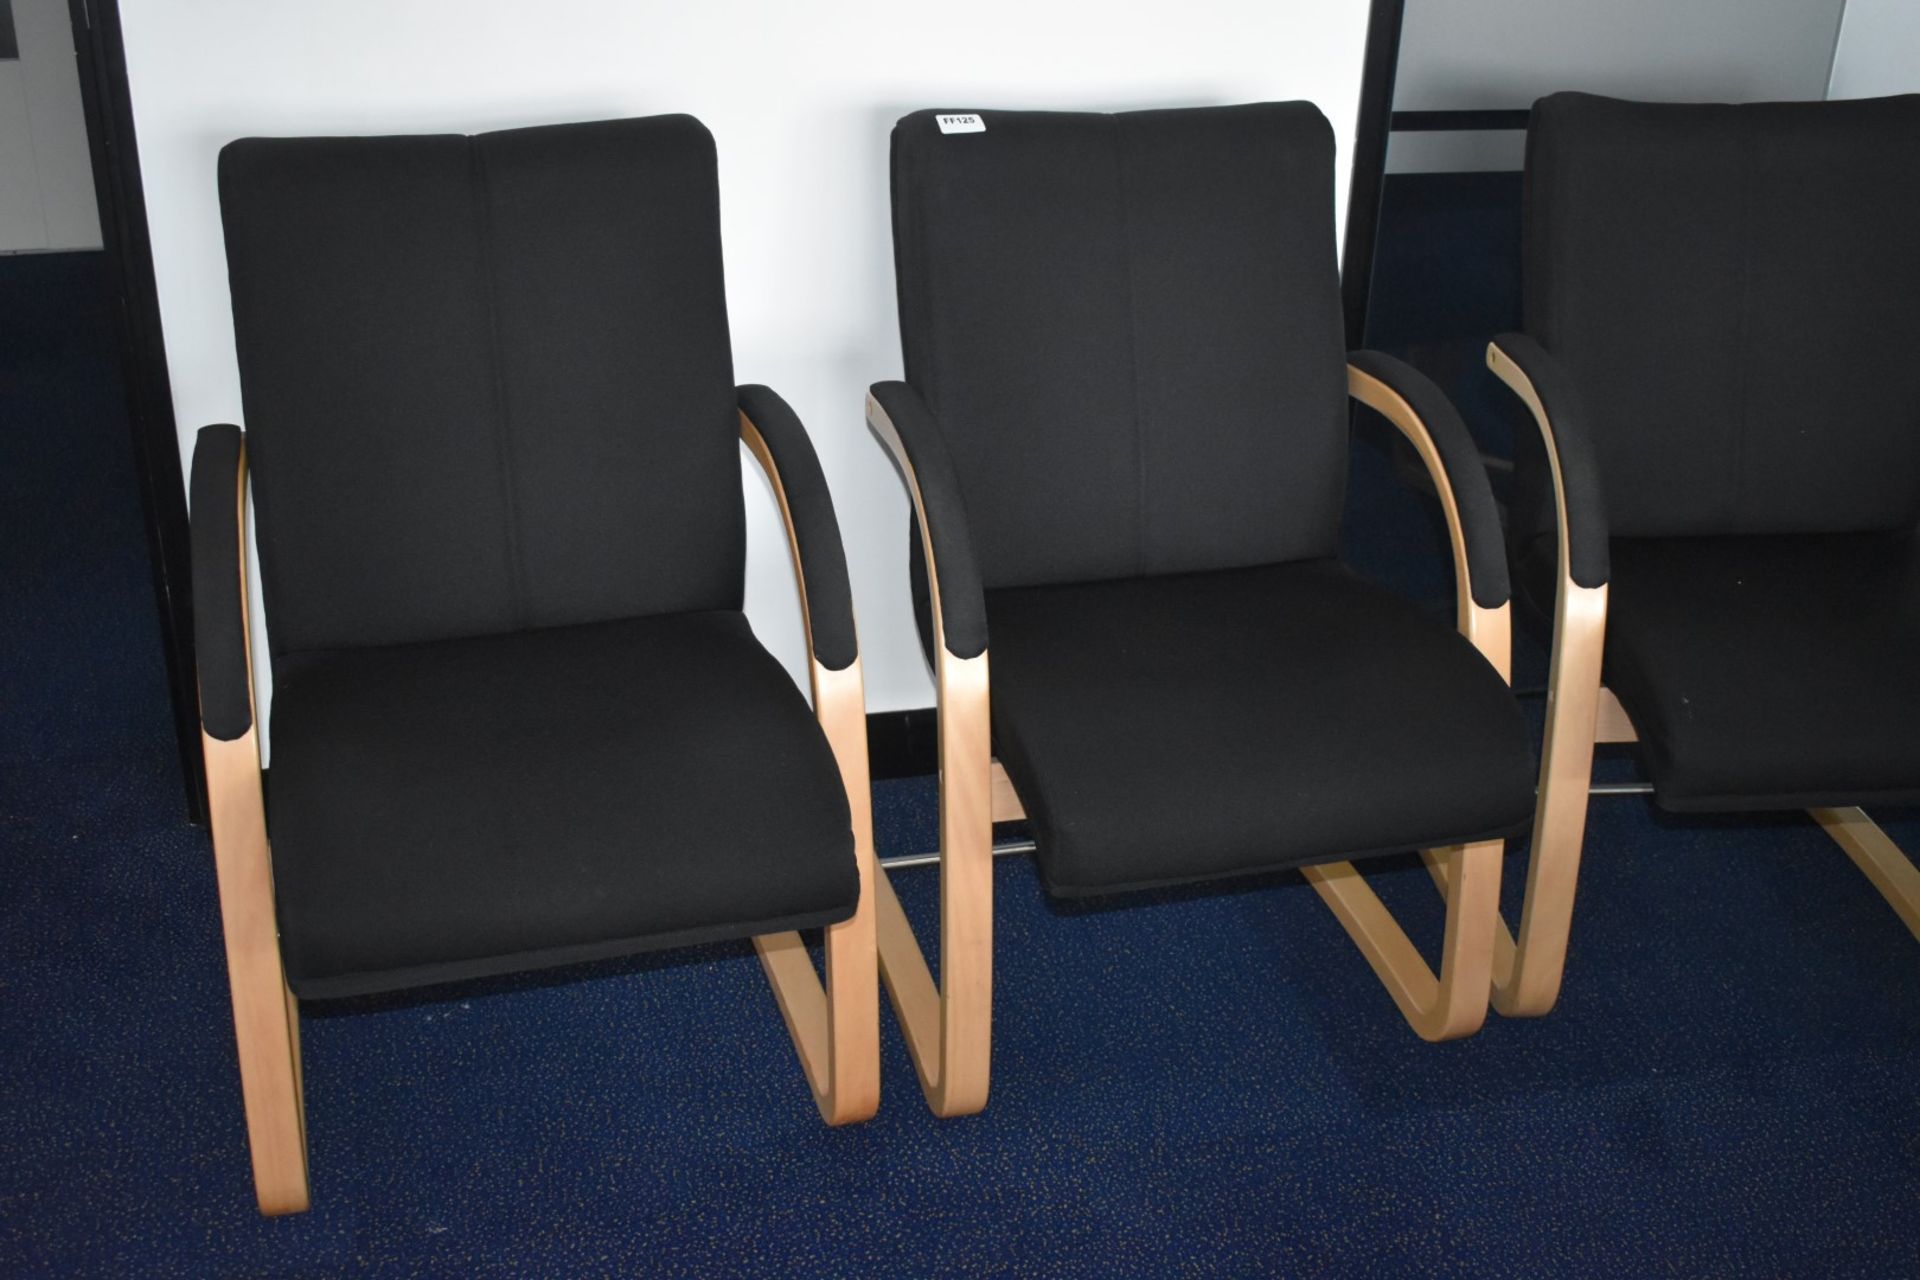 13 x Cantilever Office Meeting Chairs With Bentwood Frames and Black Fabric Seats - H87 x W48 x - Image 6 of 7